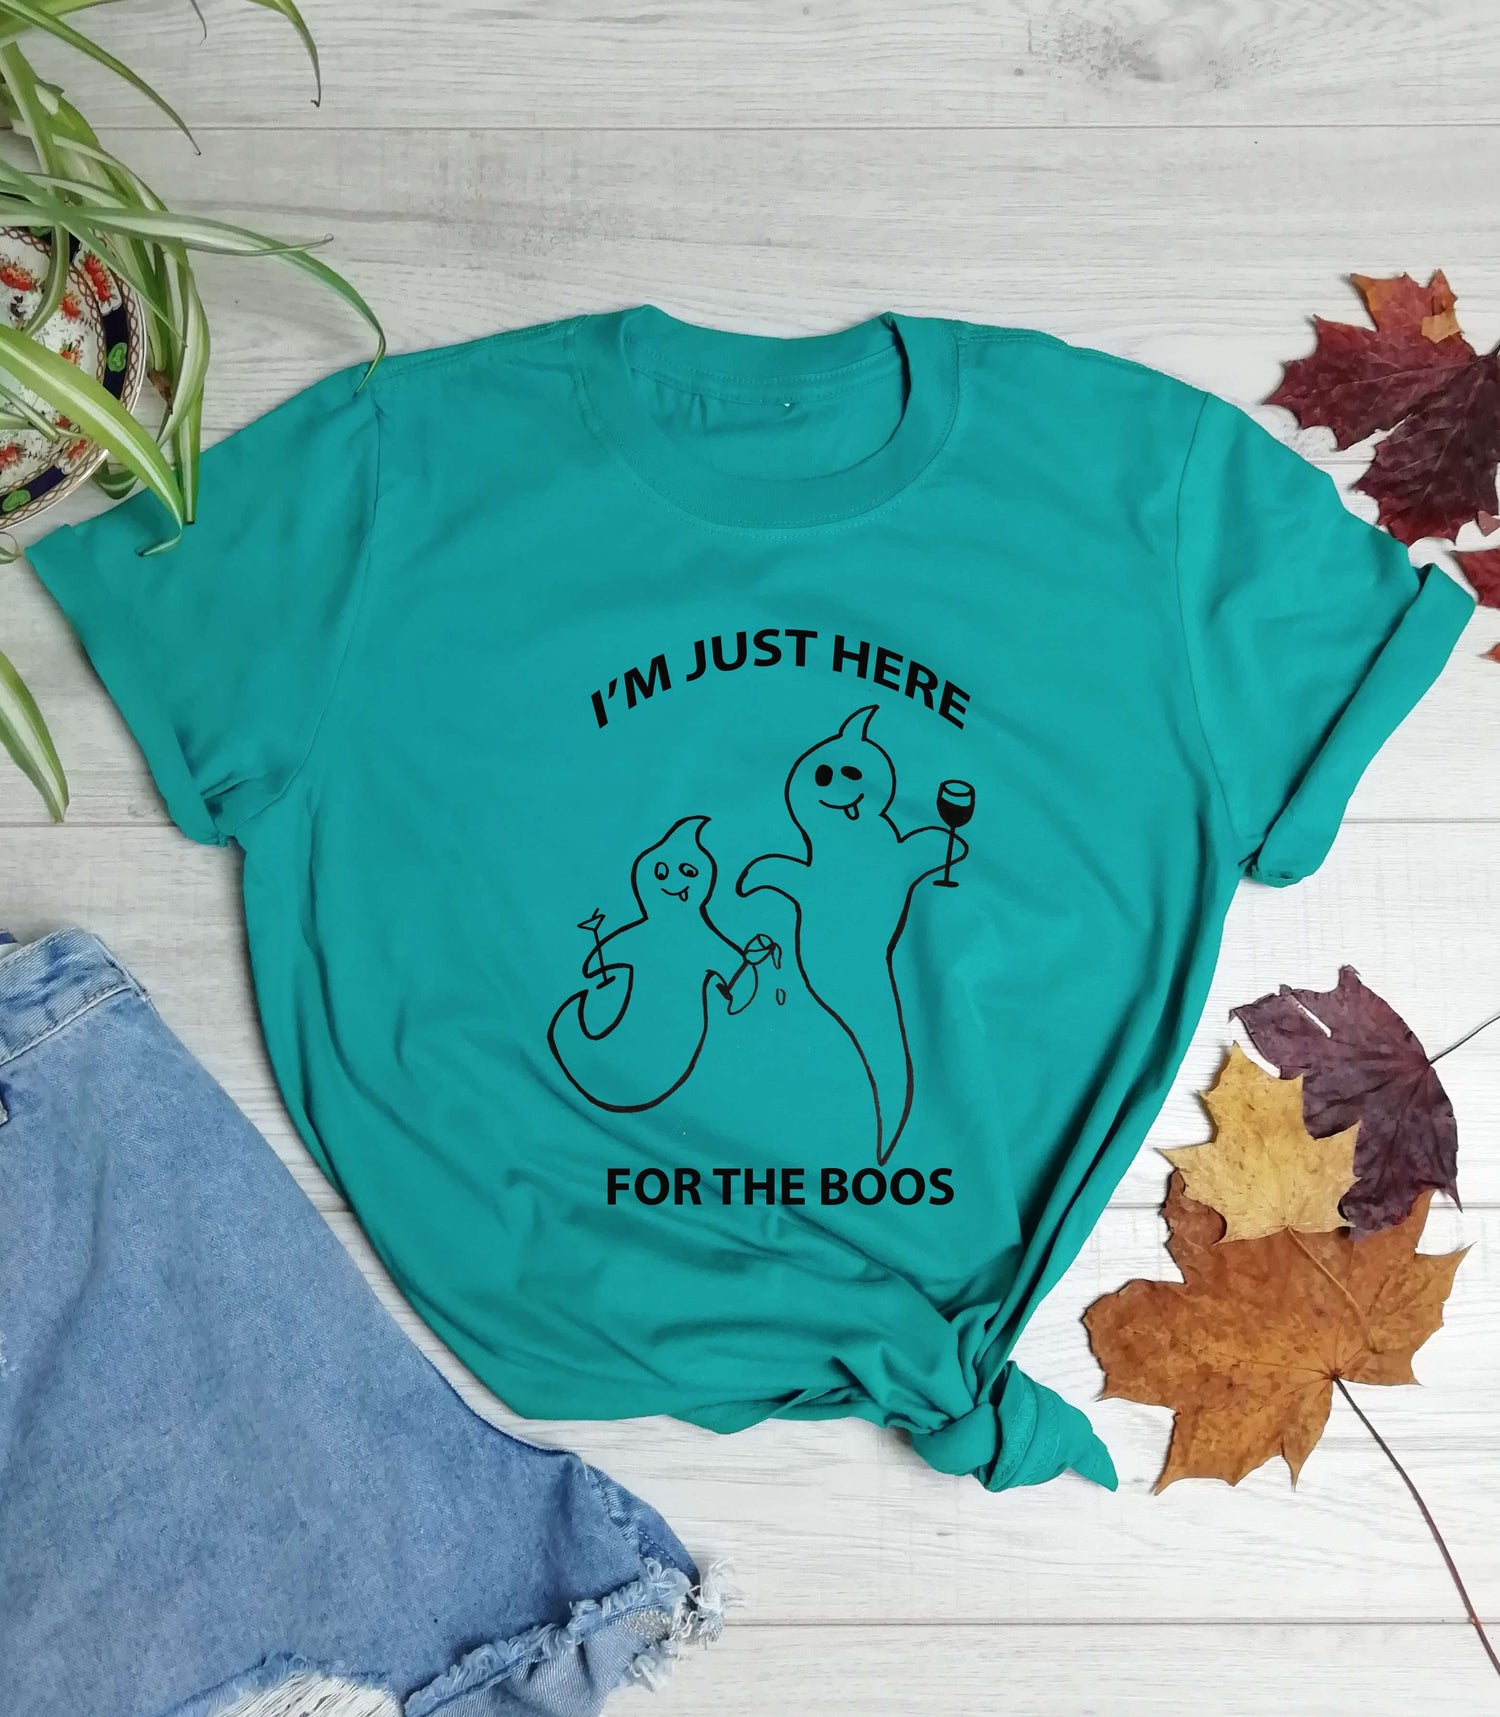 I'm just here for the boos T Shirt - Cotton - Unisex - One Planet Mind